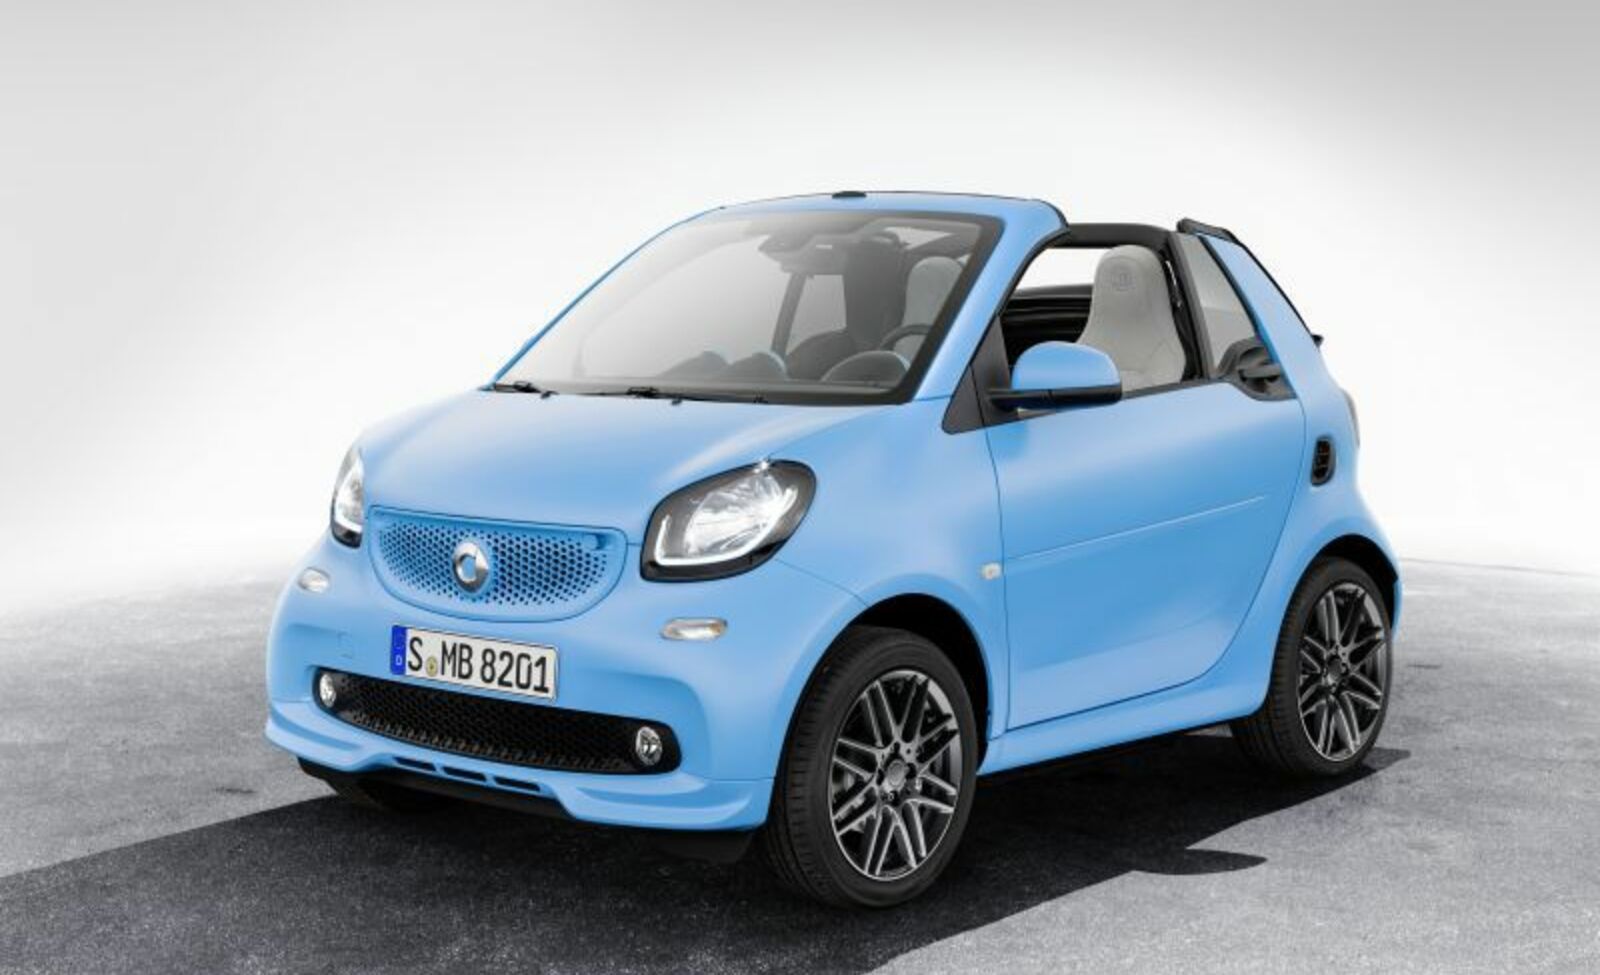 Smart Fortwo III cabrio 17.6 kWh (82 Hp) electric drive 2017, 2018, 2019 